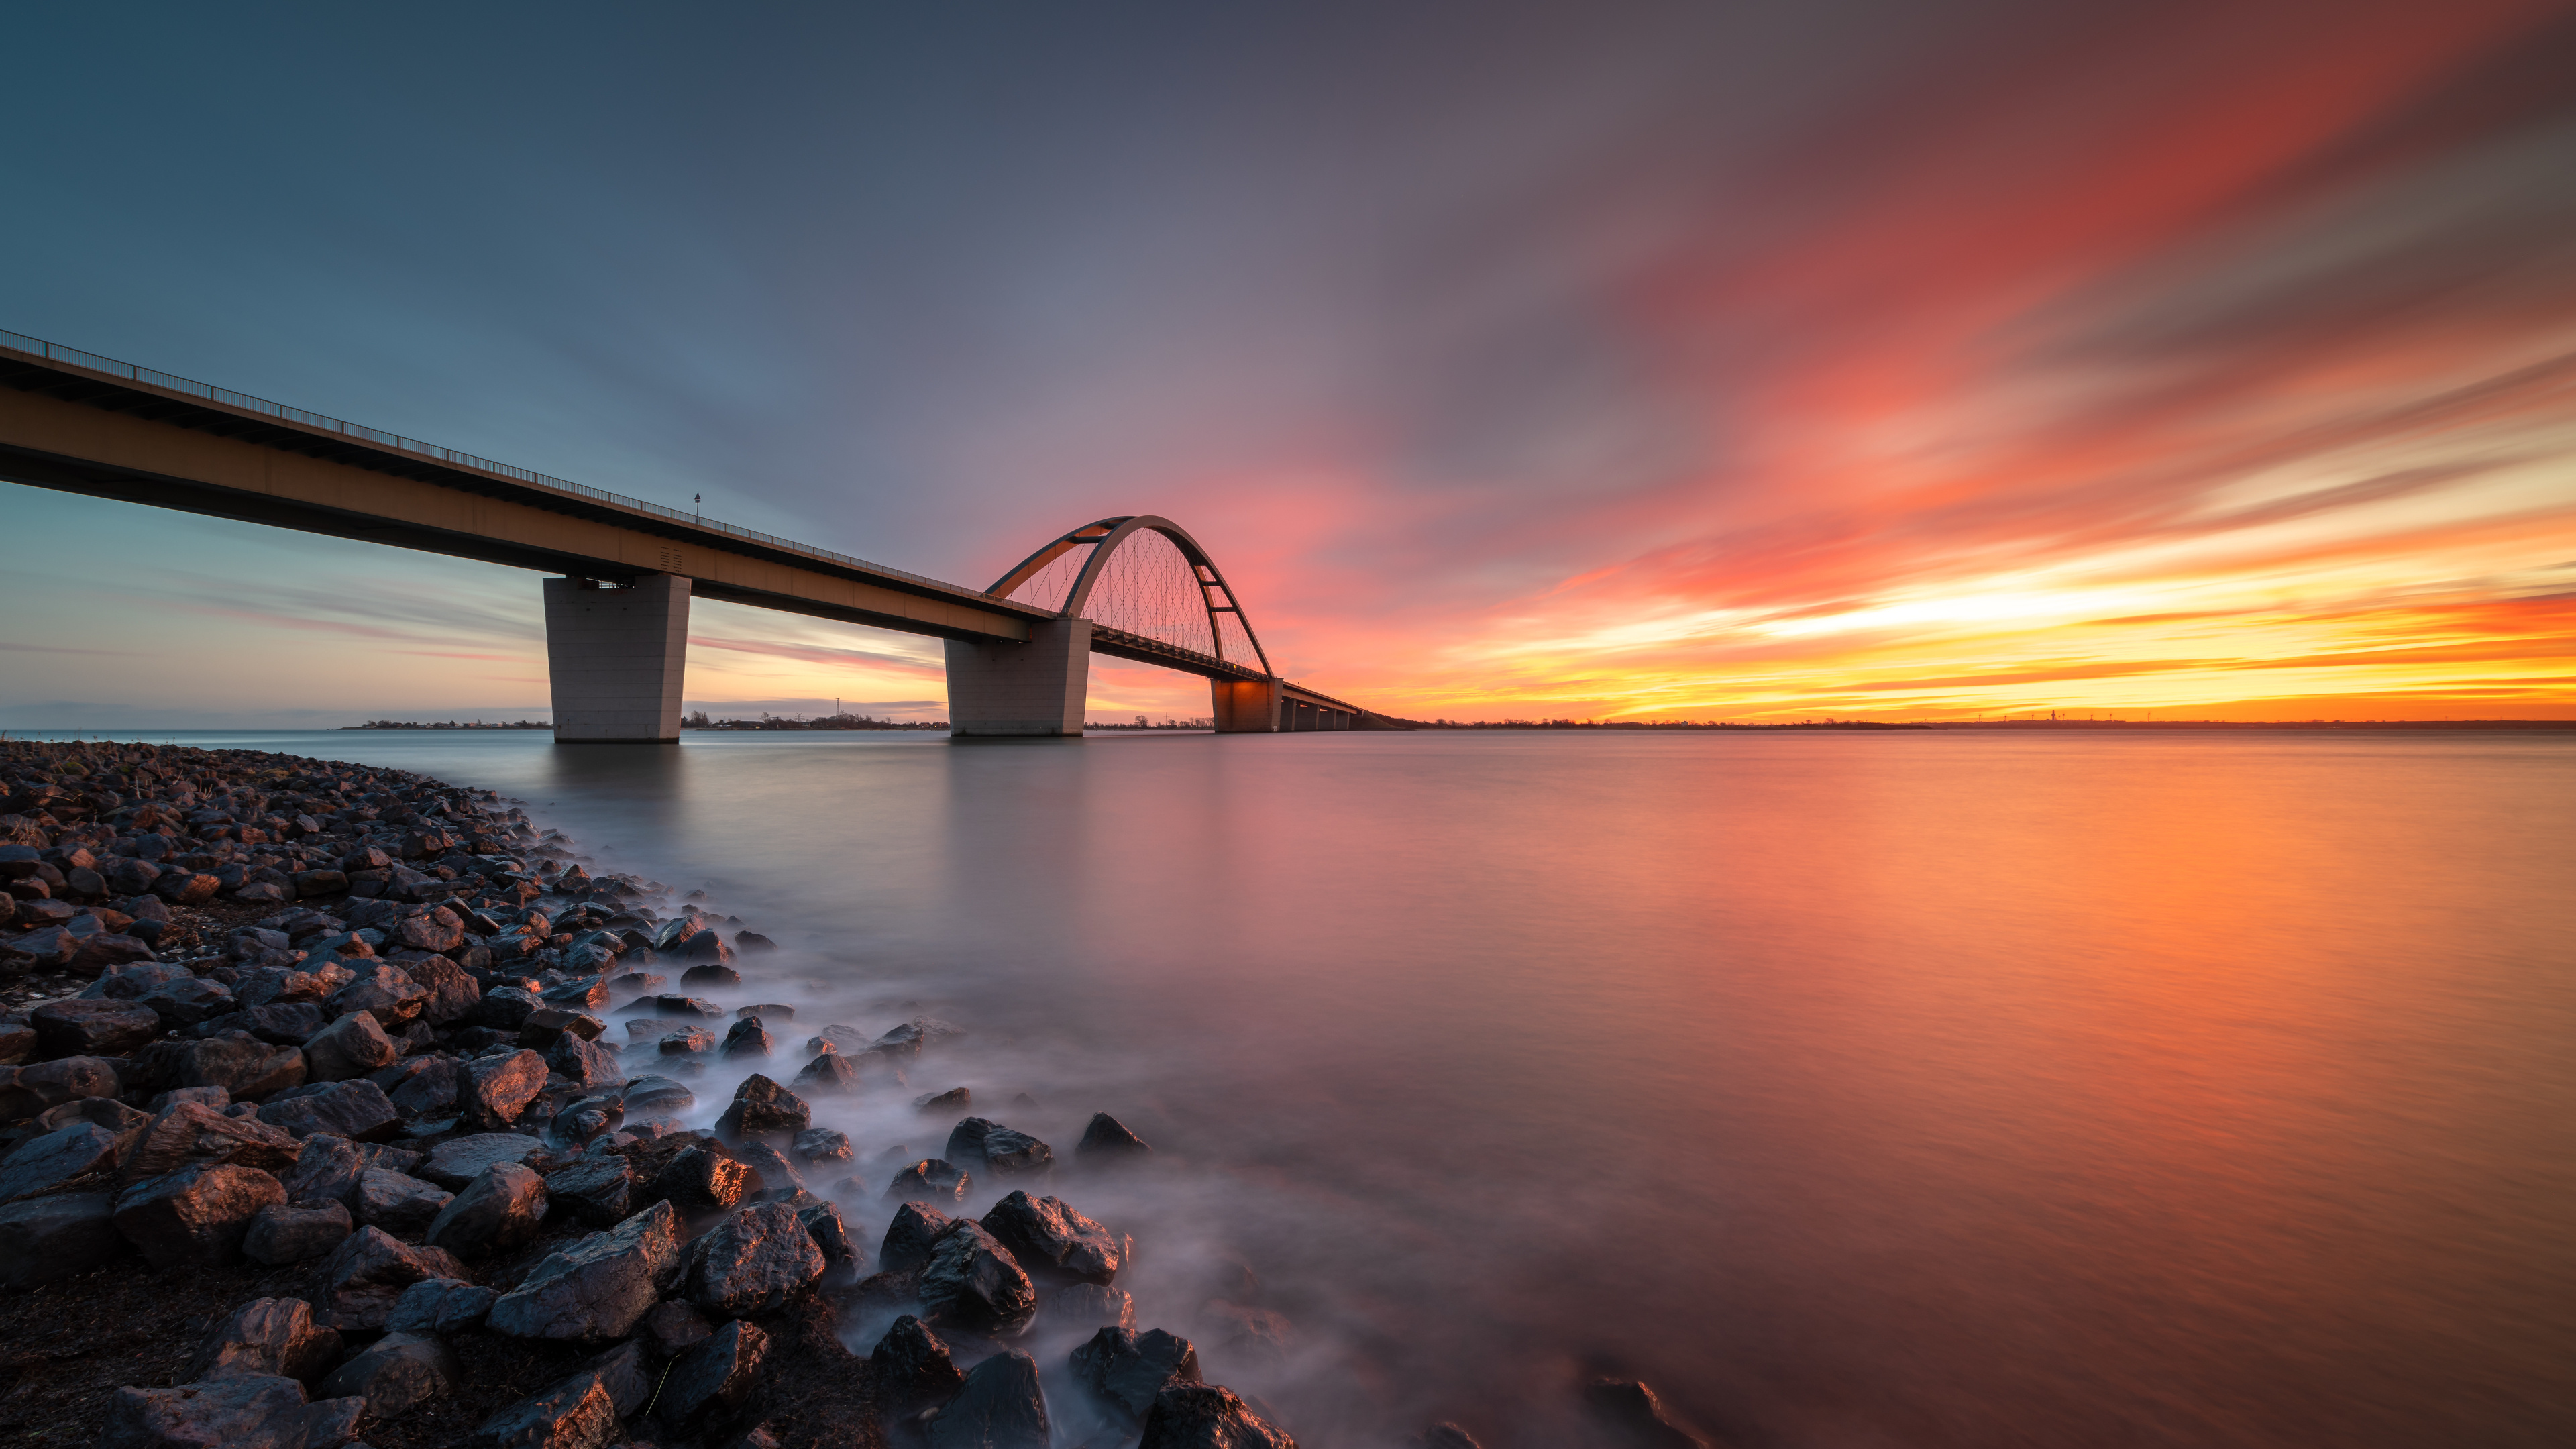 Bridge: Amazing sunset and the structure built to span the strait. 3840x2160 4K Wallpaper.